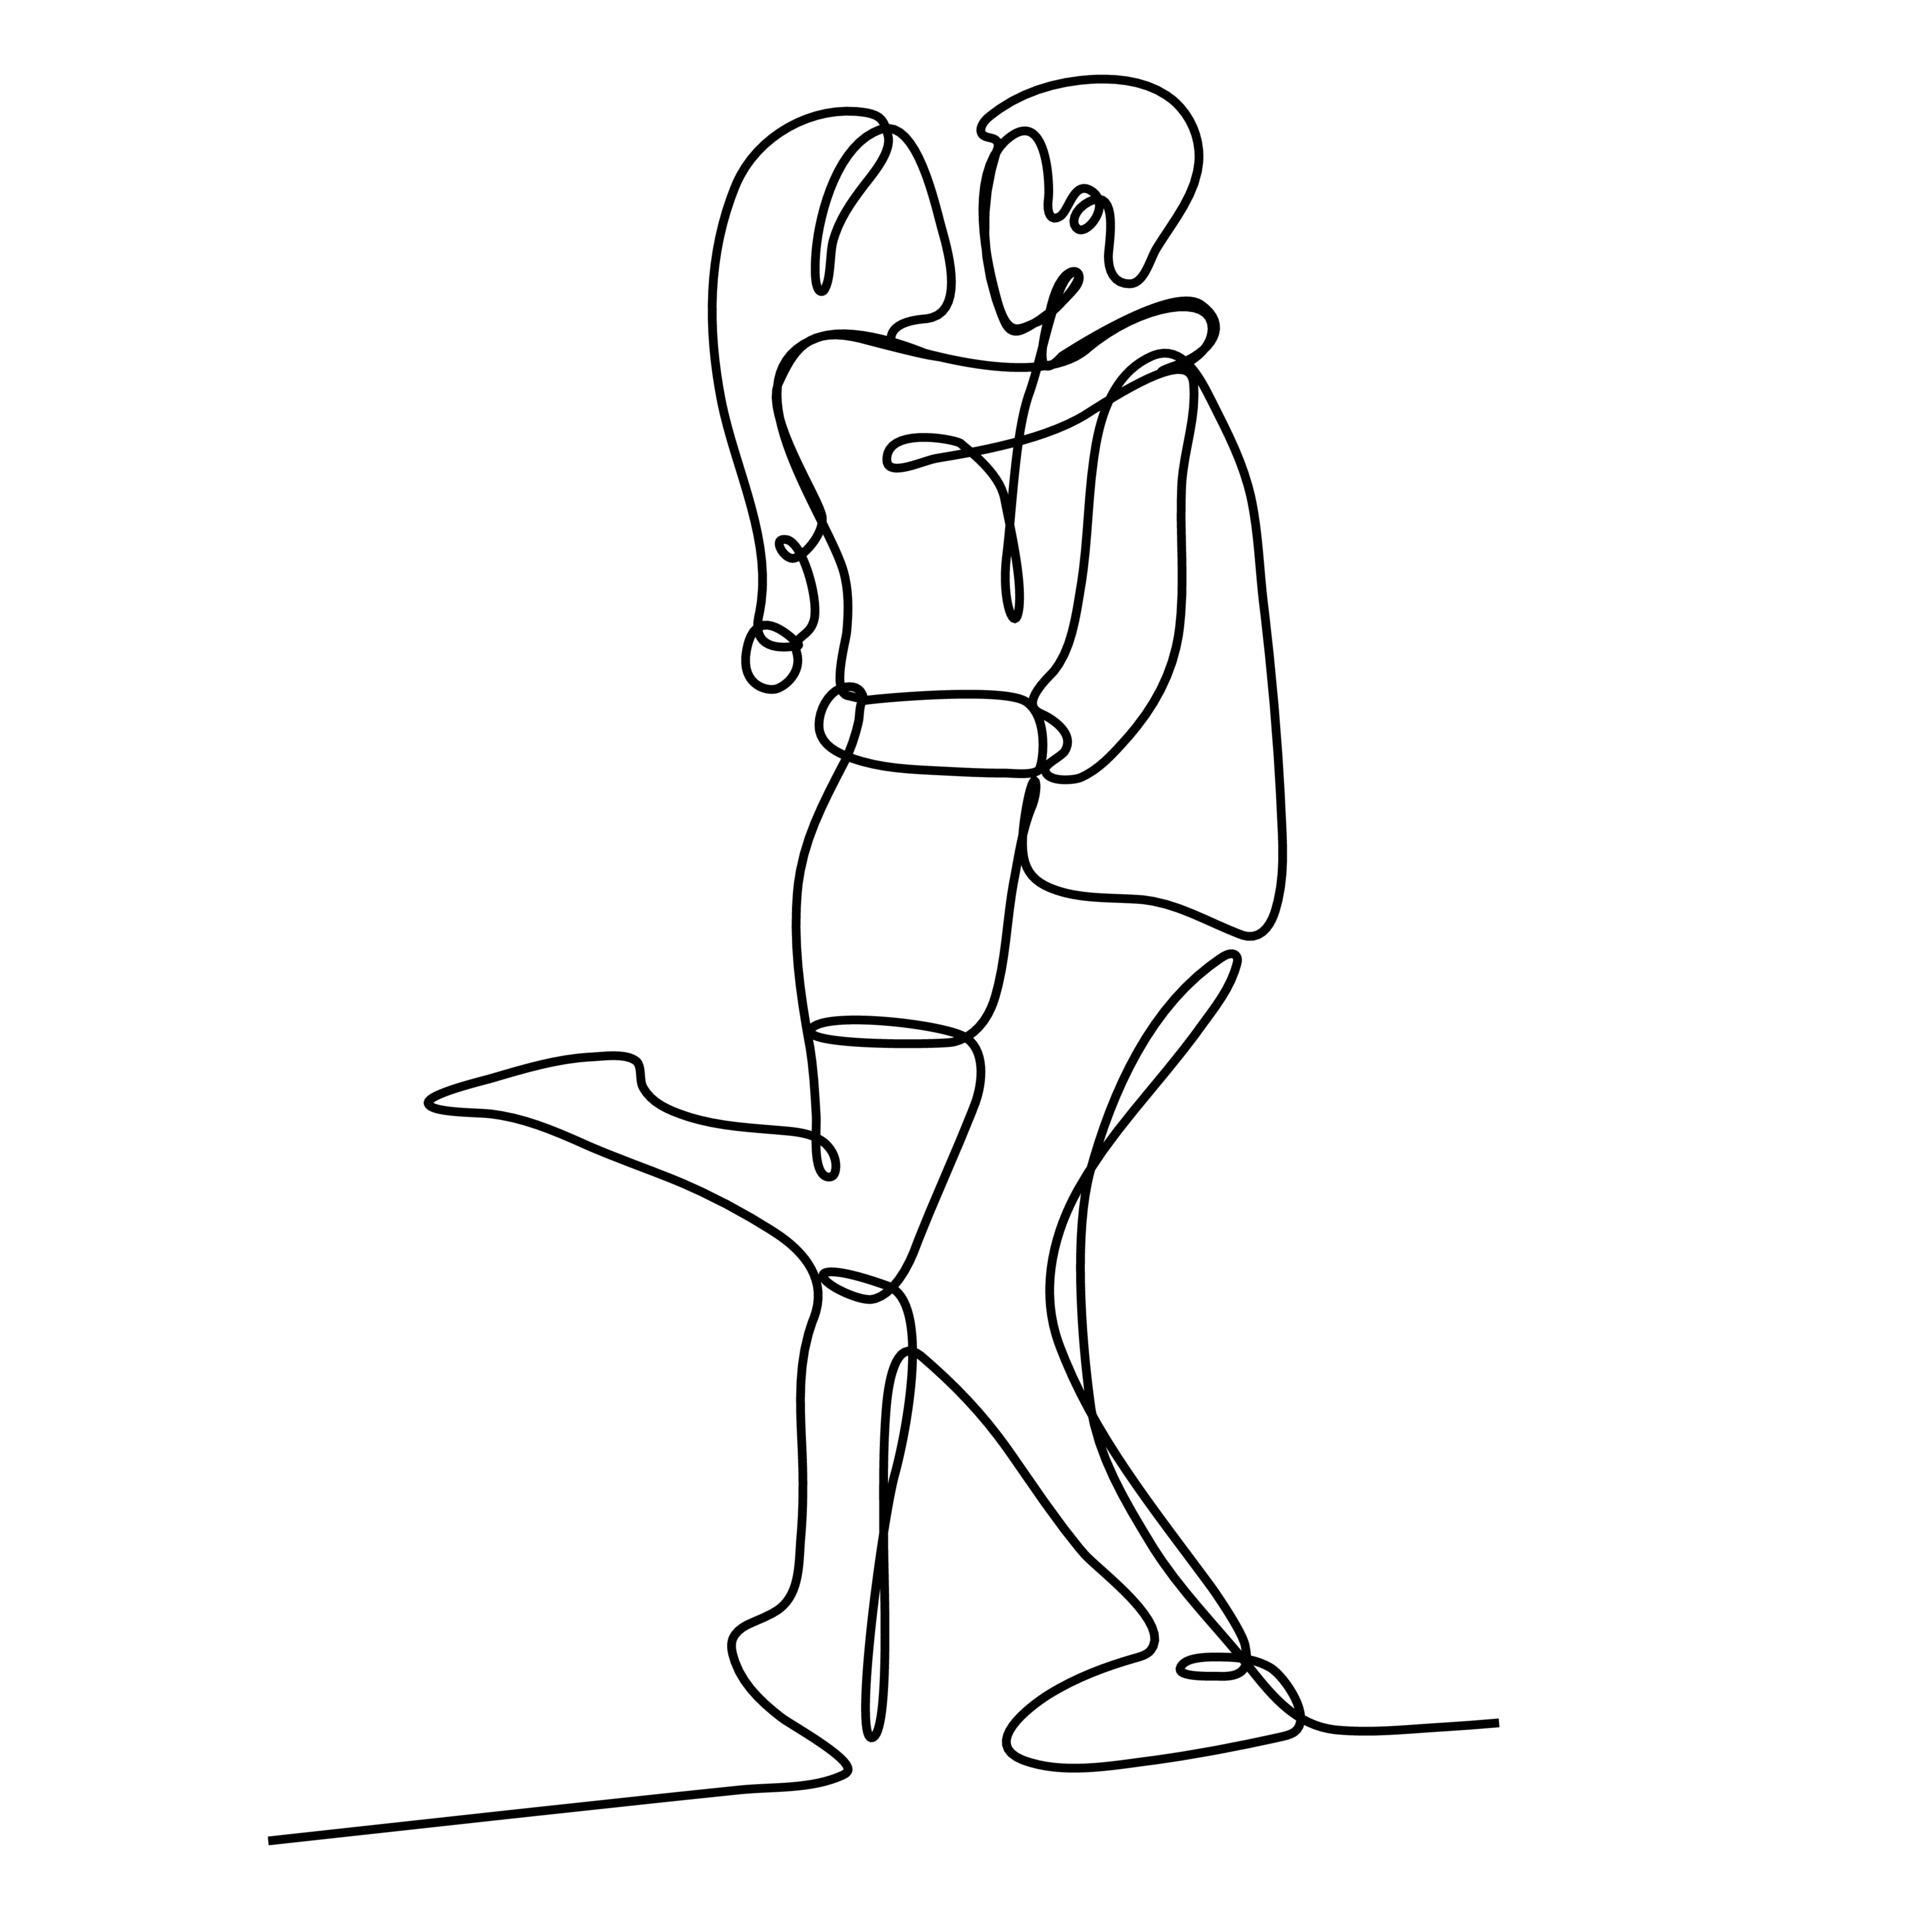 How to Draw Romantic Kisses Between Two Lovers - Step by Step